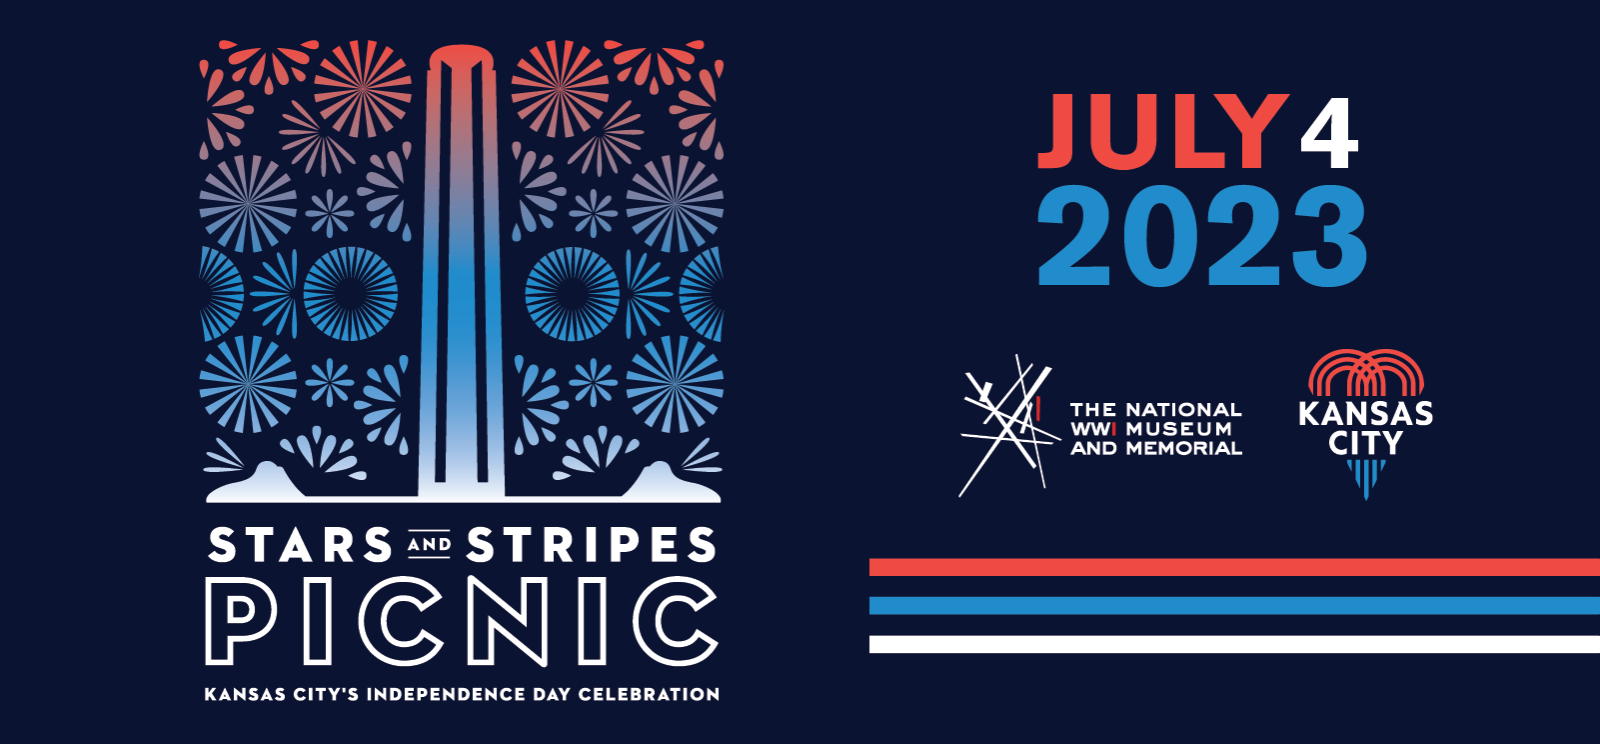 Stylized graphics of fireworks surrounding a stylized Liberty Memorial Tower, in red, white and blue. Text: 'Stars and Stripes Picnic / Kansas City's Independence Day Celebration / July 4 2023'